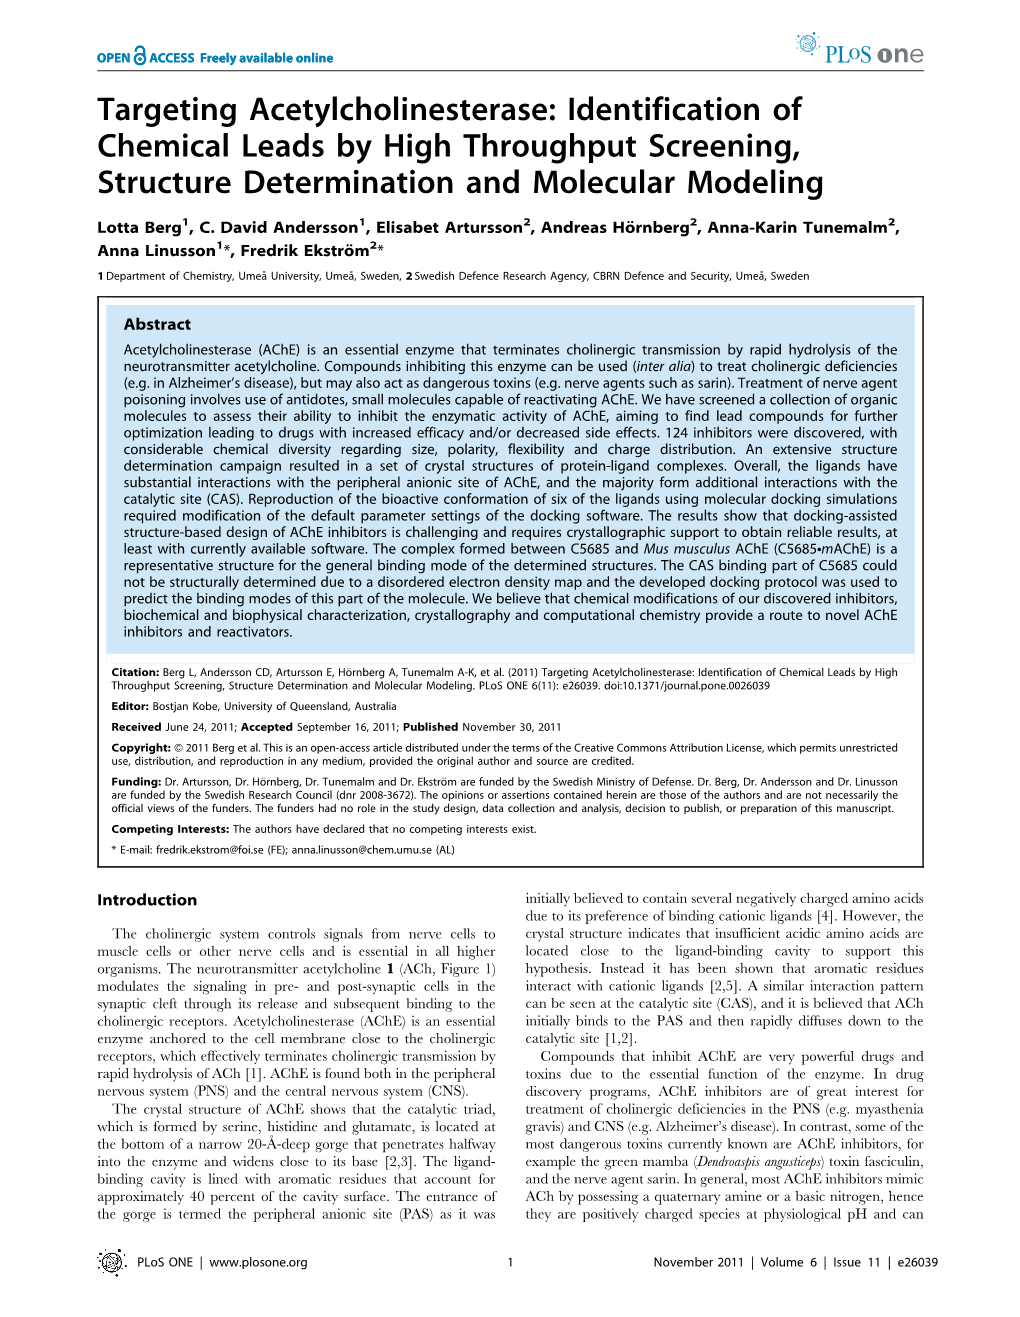 Identification of Chemical Leads by High Throughput Screening, Structure Determination and Molecular Modeling